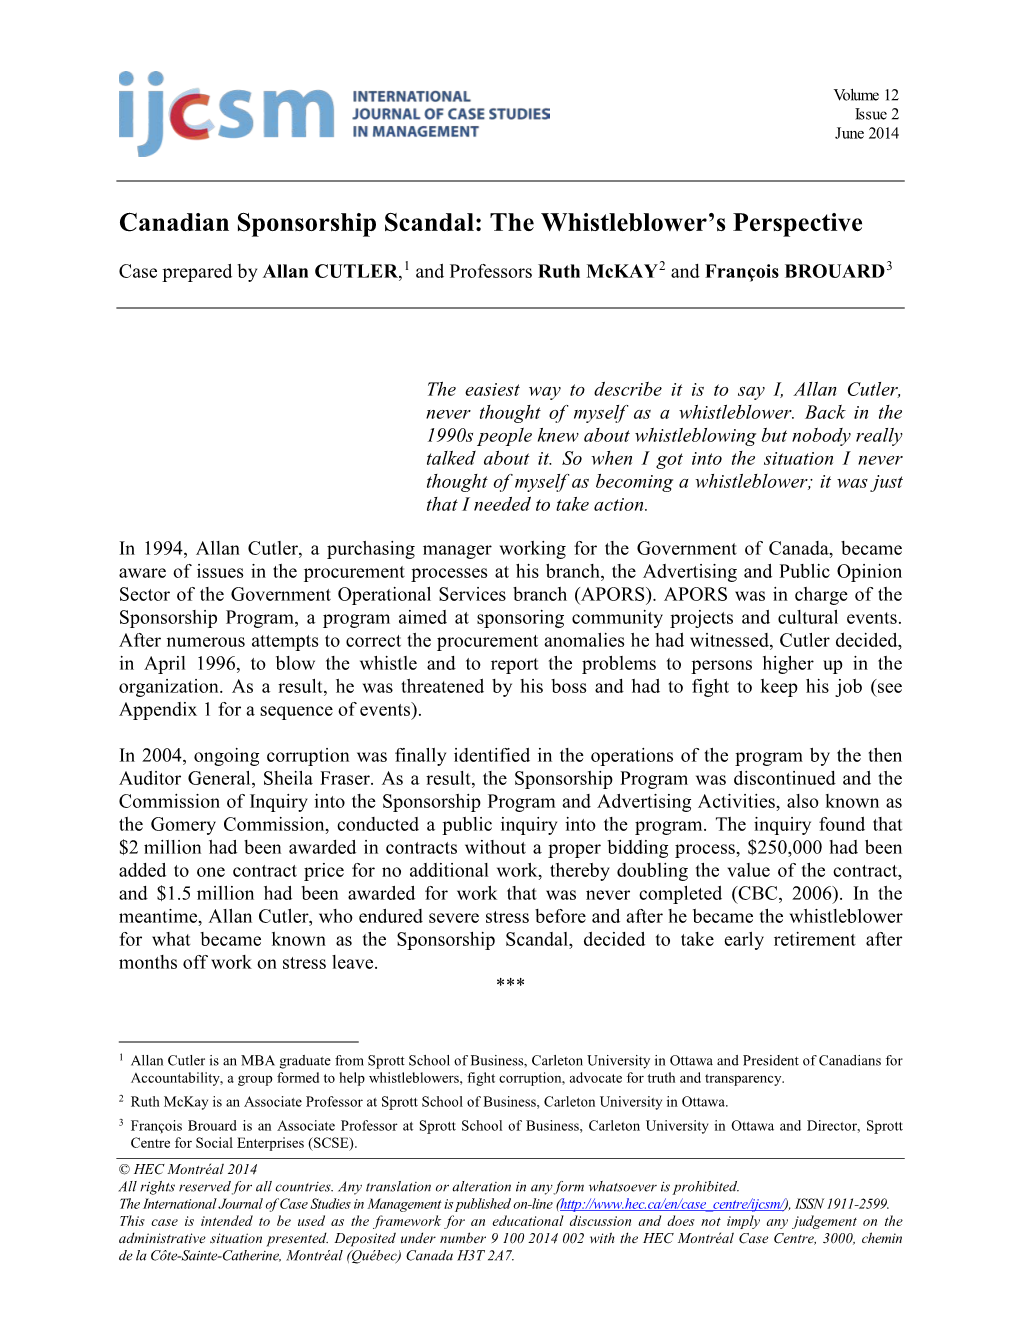 Canadian Sponsorship Scandal: the Whistleblower's Perspective